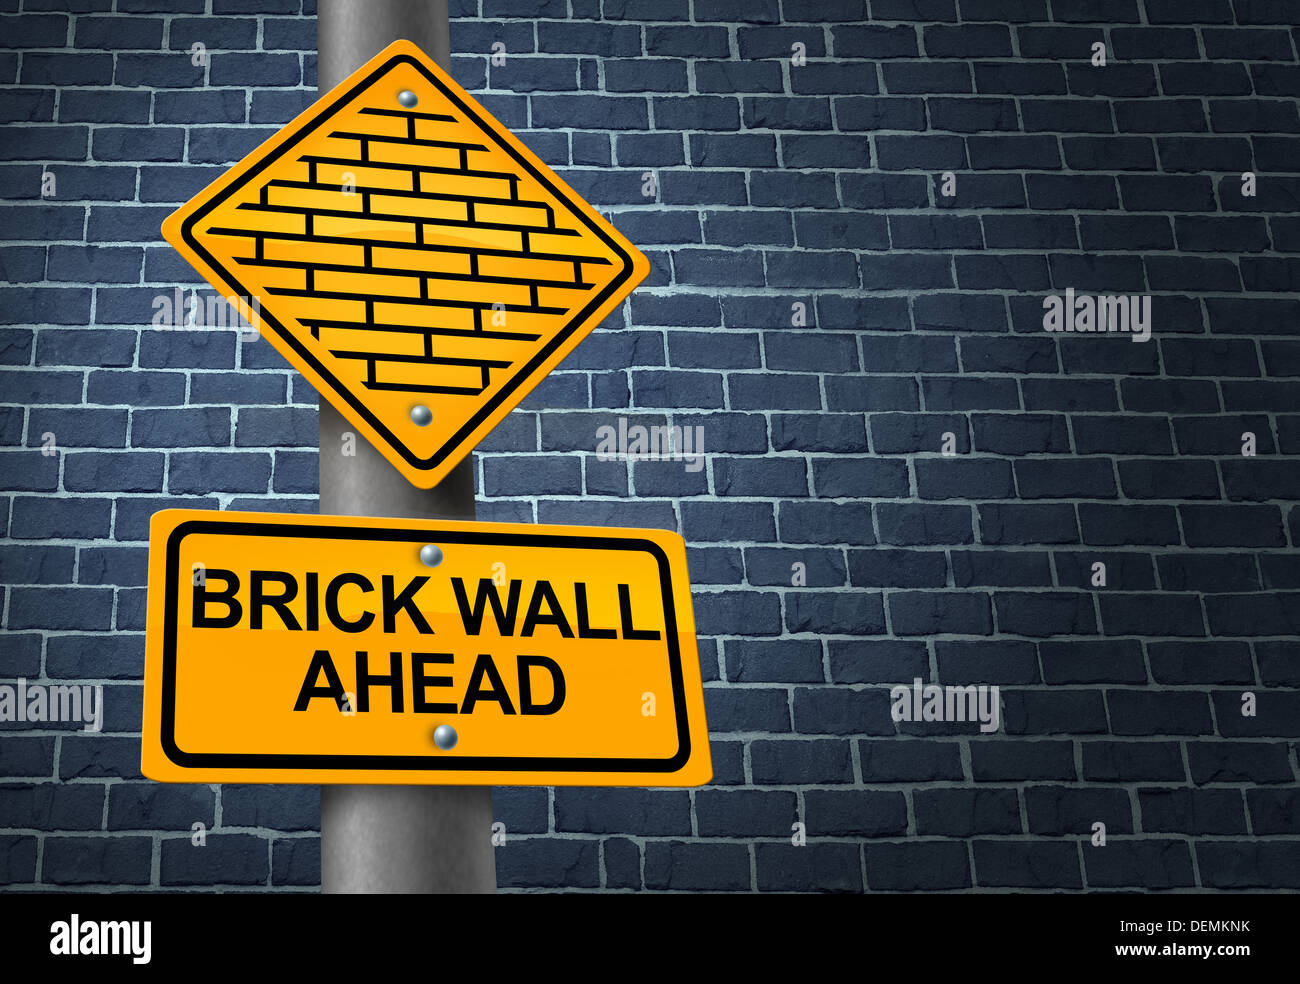 Against A Brick Wall business concept of hardship and difficult restrictions faced on a journey focused on success represented by a yellow traffic sign warning of a future challenging obstacle that will obstruct the planned strategy. Stock Photo